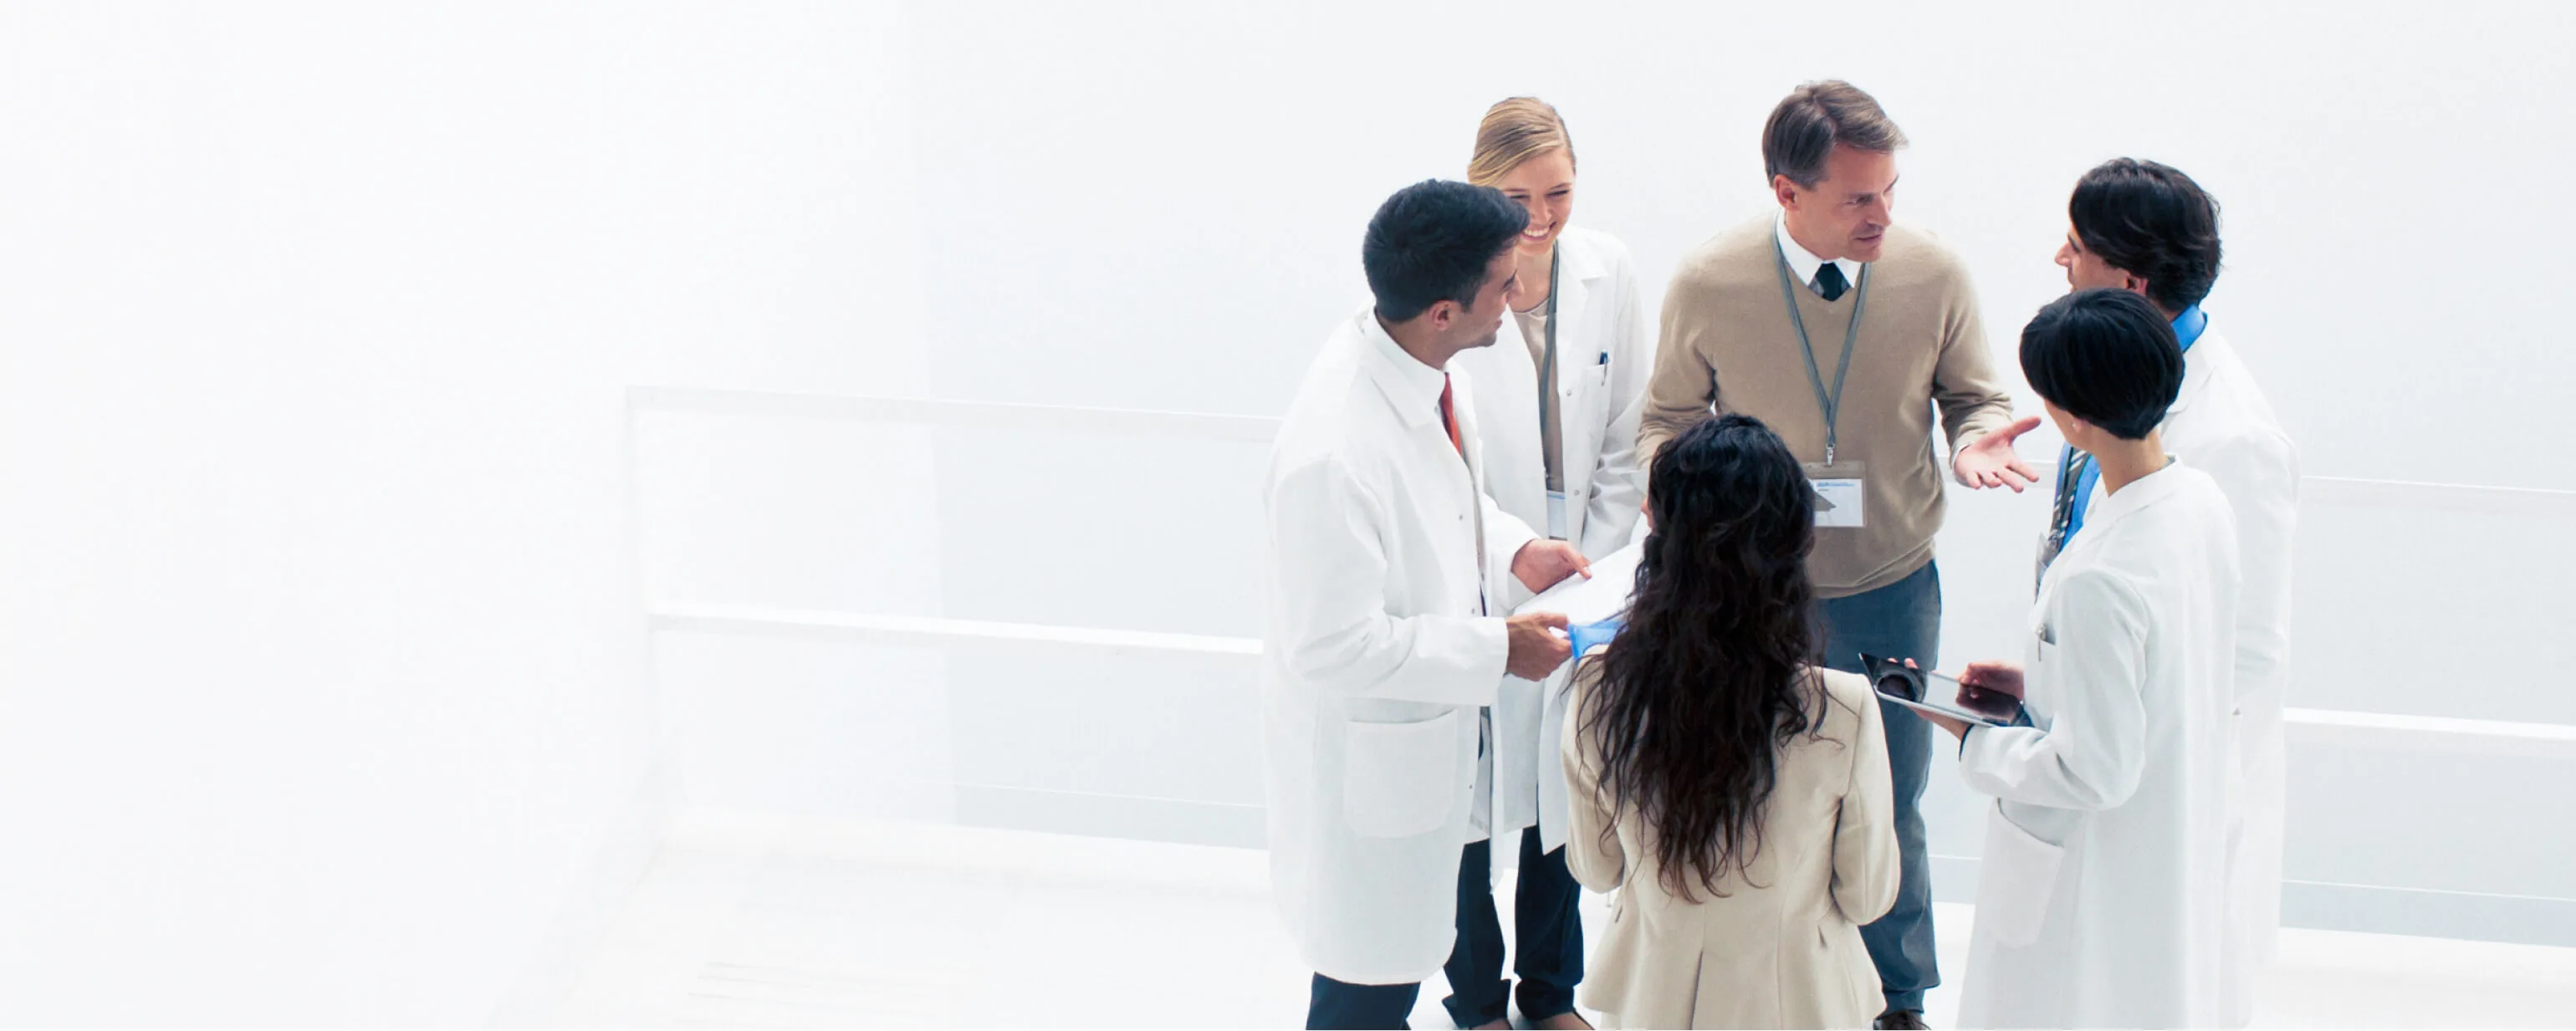 A group of medical professionals stand in a circle while in discussion.